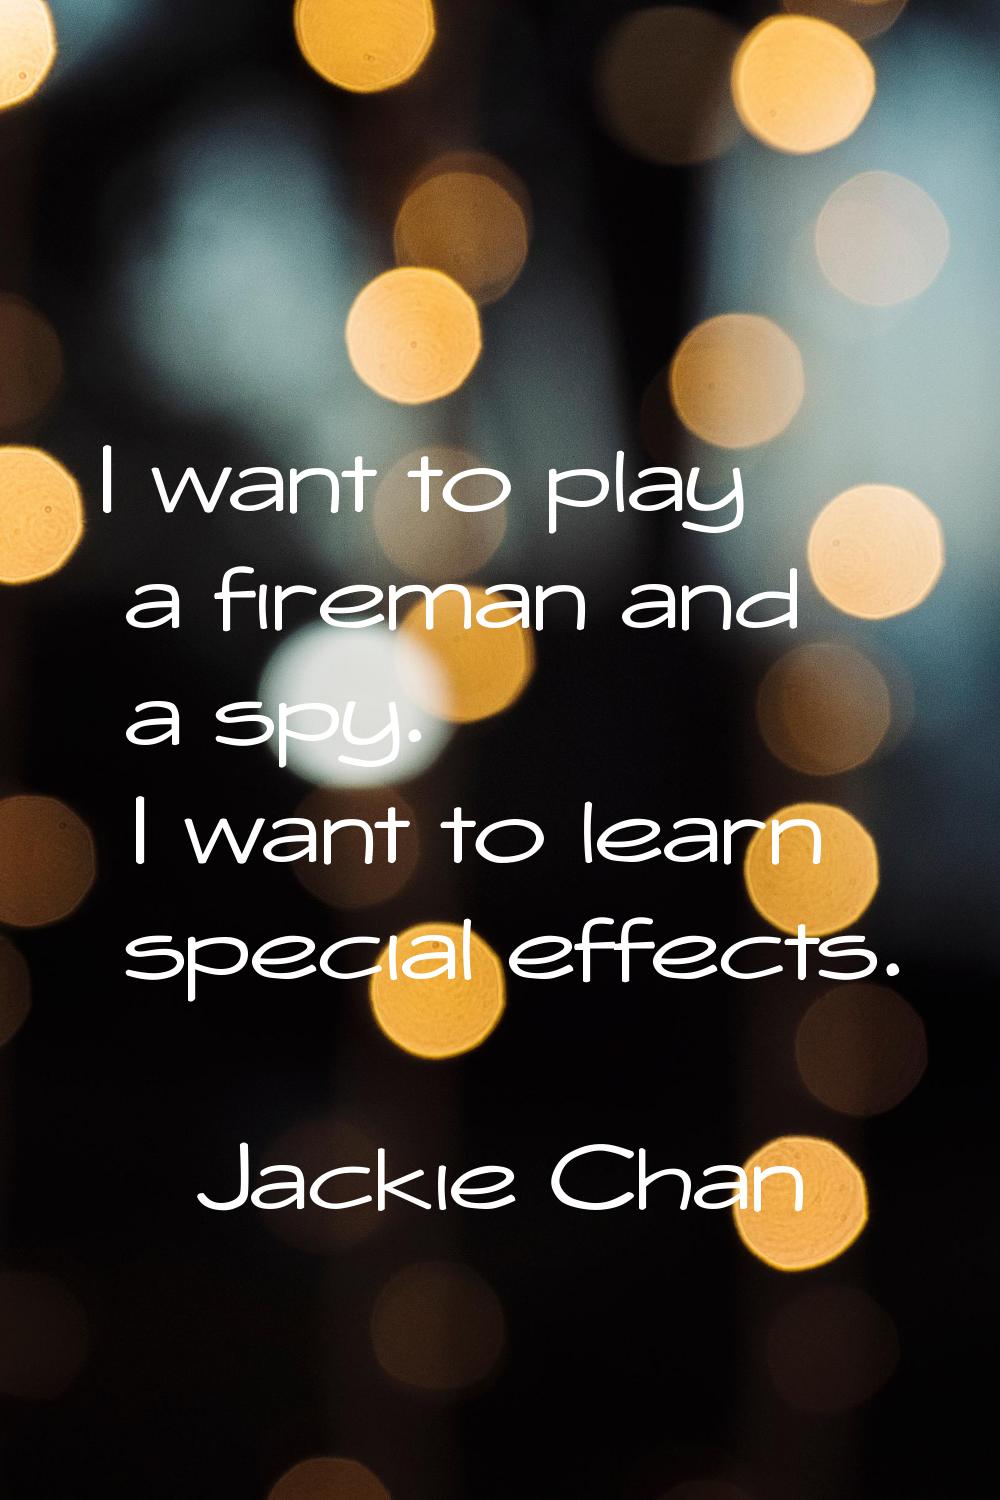 I want to play a fireman and a spy. I want to learn special effects.